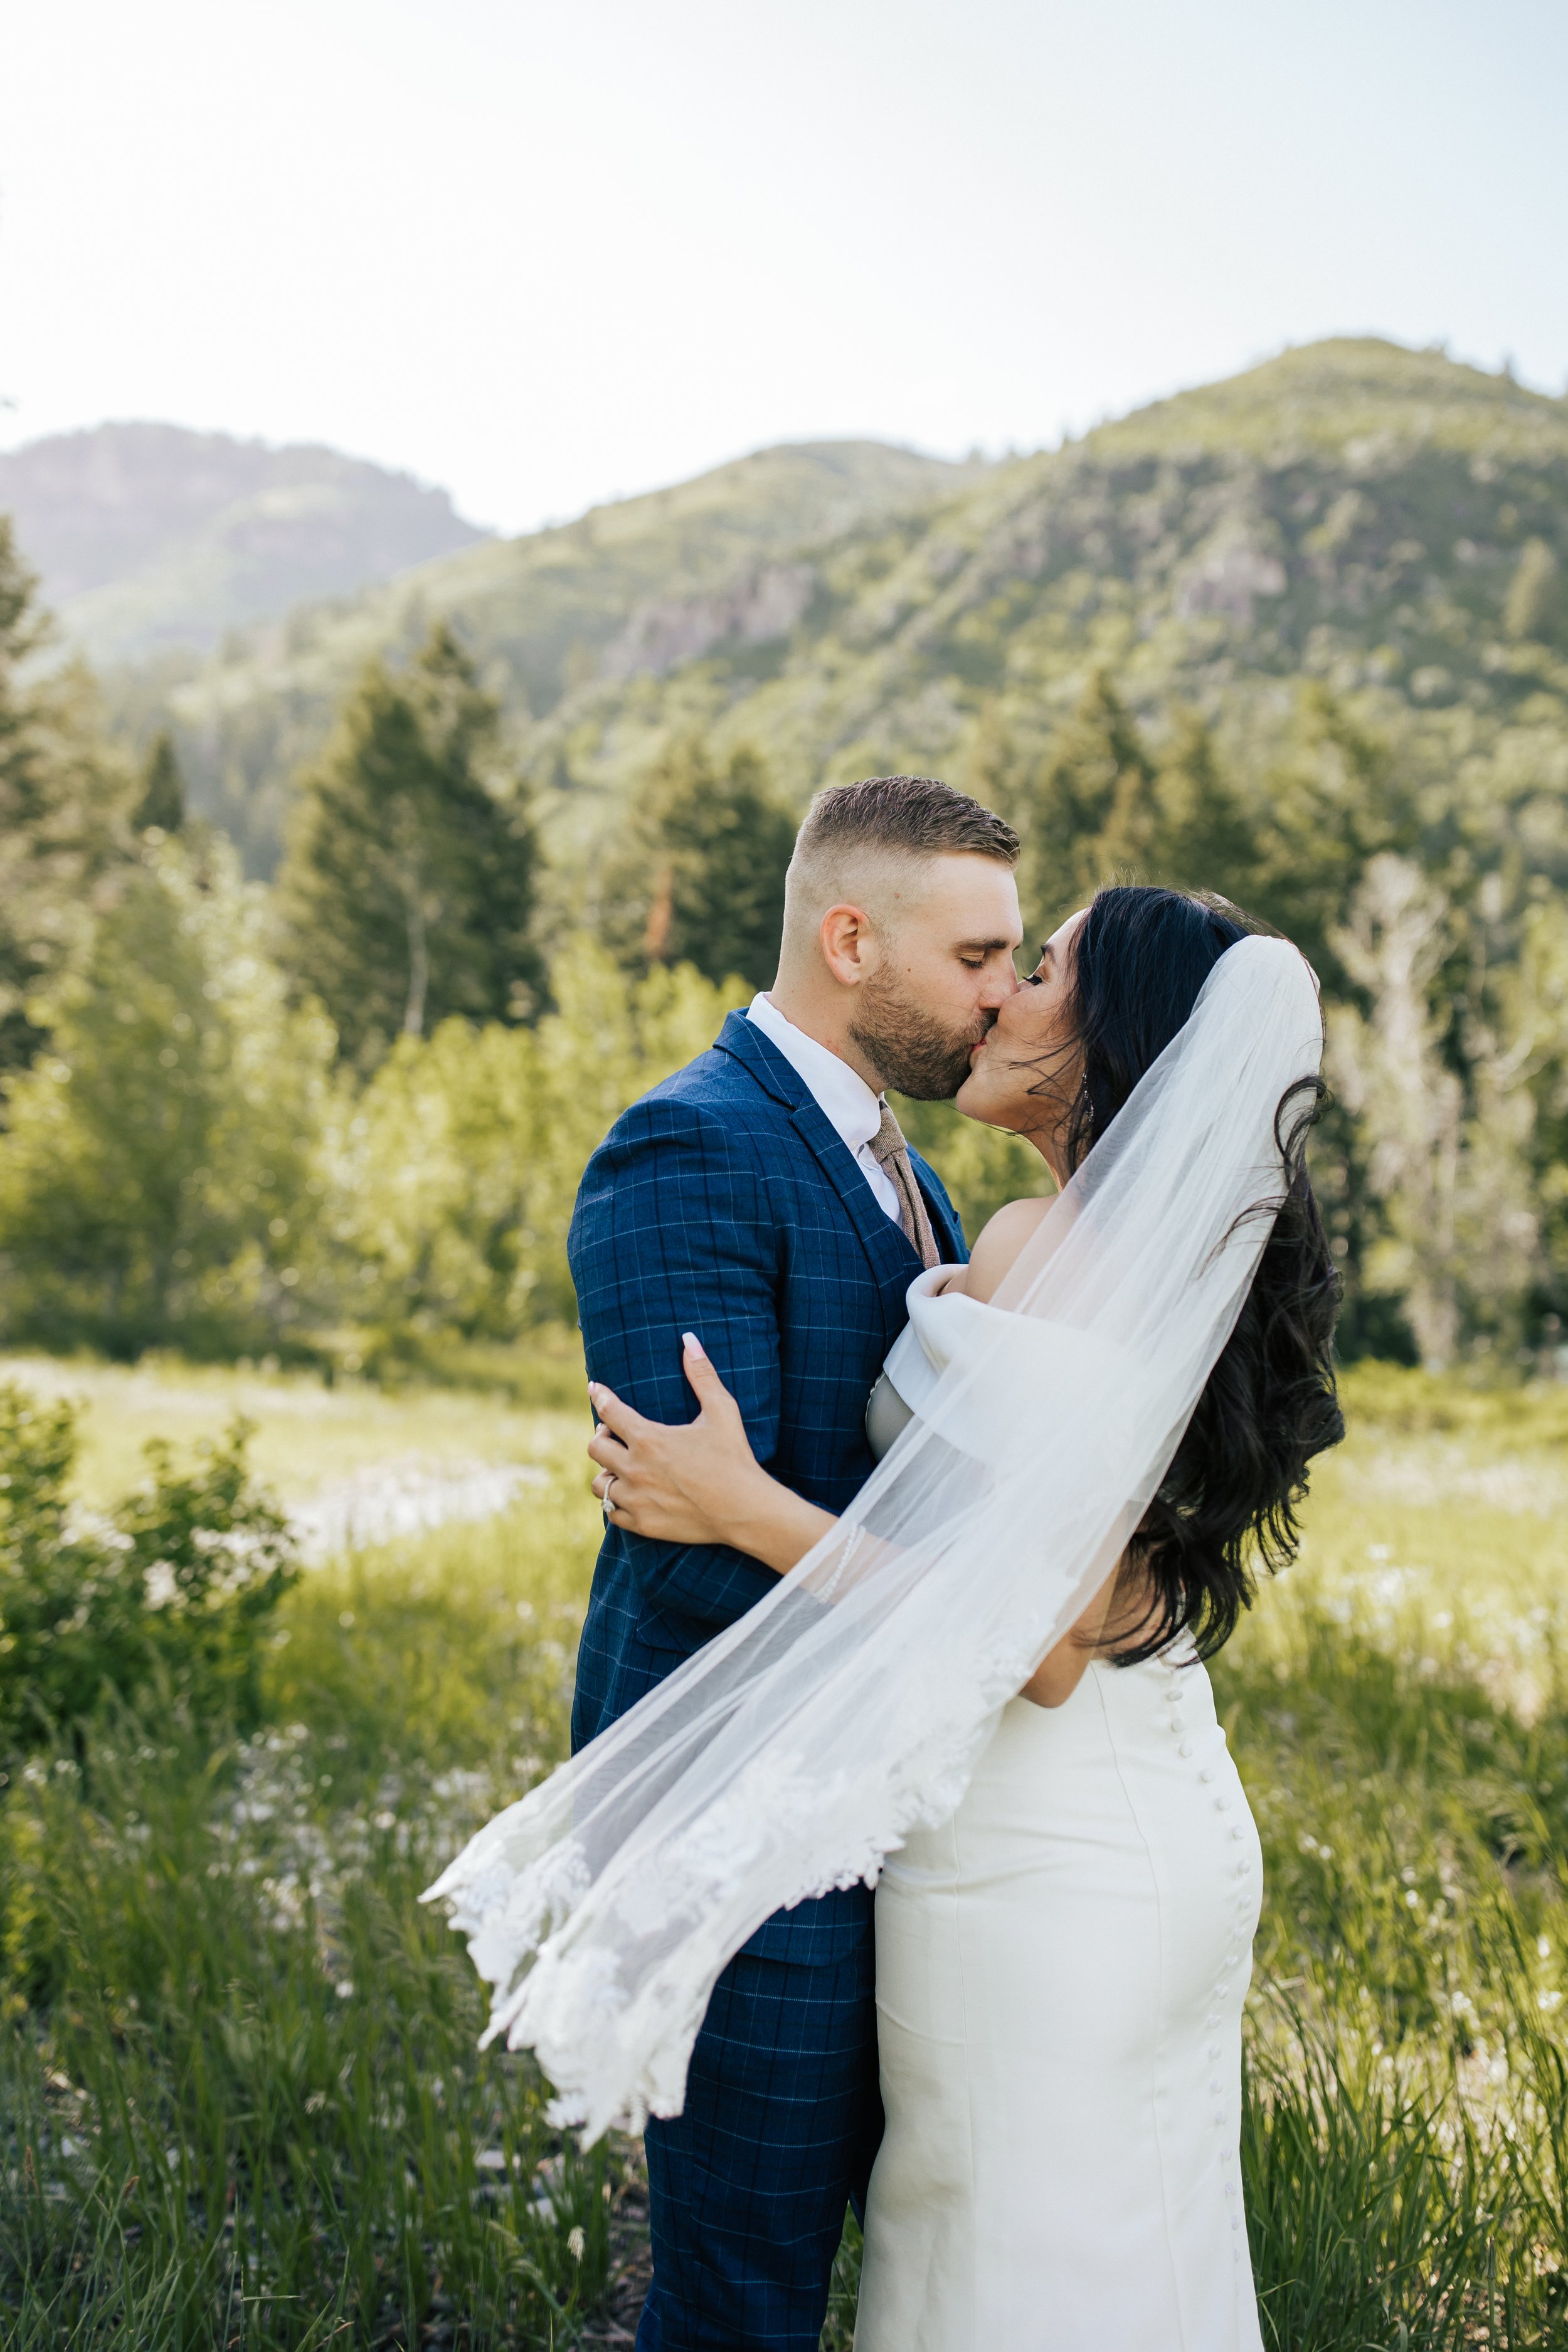  Bride and groom kiss during their look session and bridal session with bride and groom before their wedding ceremony in Aspen Grove, Provo Canyon, Utah. #weddingdress #firstlook #bridalportraits 